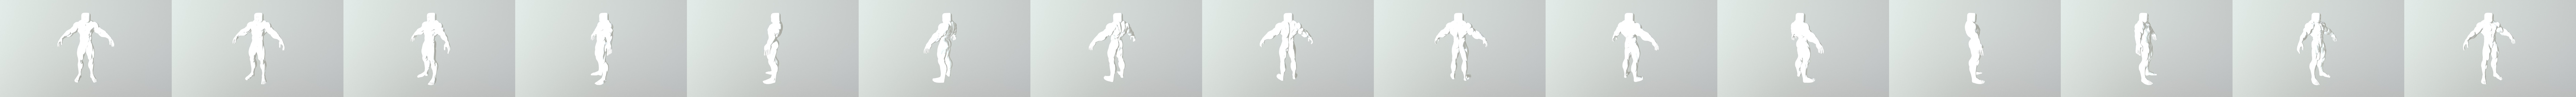 Buff Roblox Charterer 3d Model By Speroketgaming12 Speroketgaming12 D0cb071 - buff roblox guy transparent background